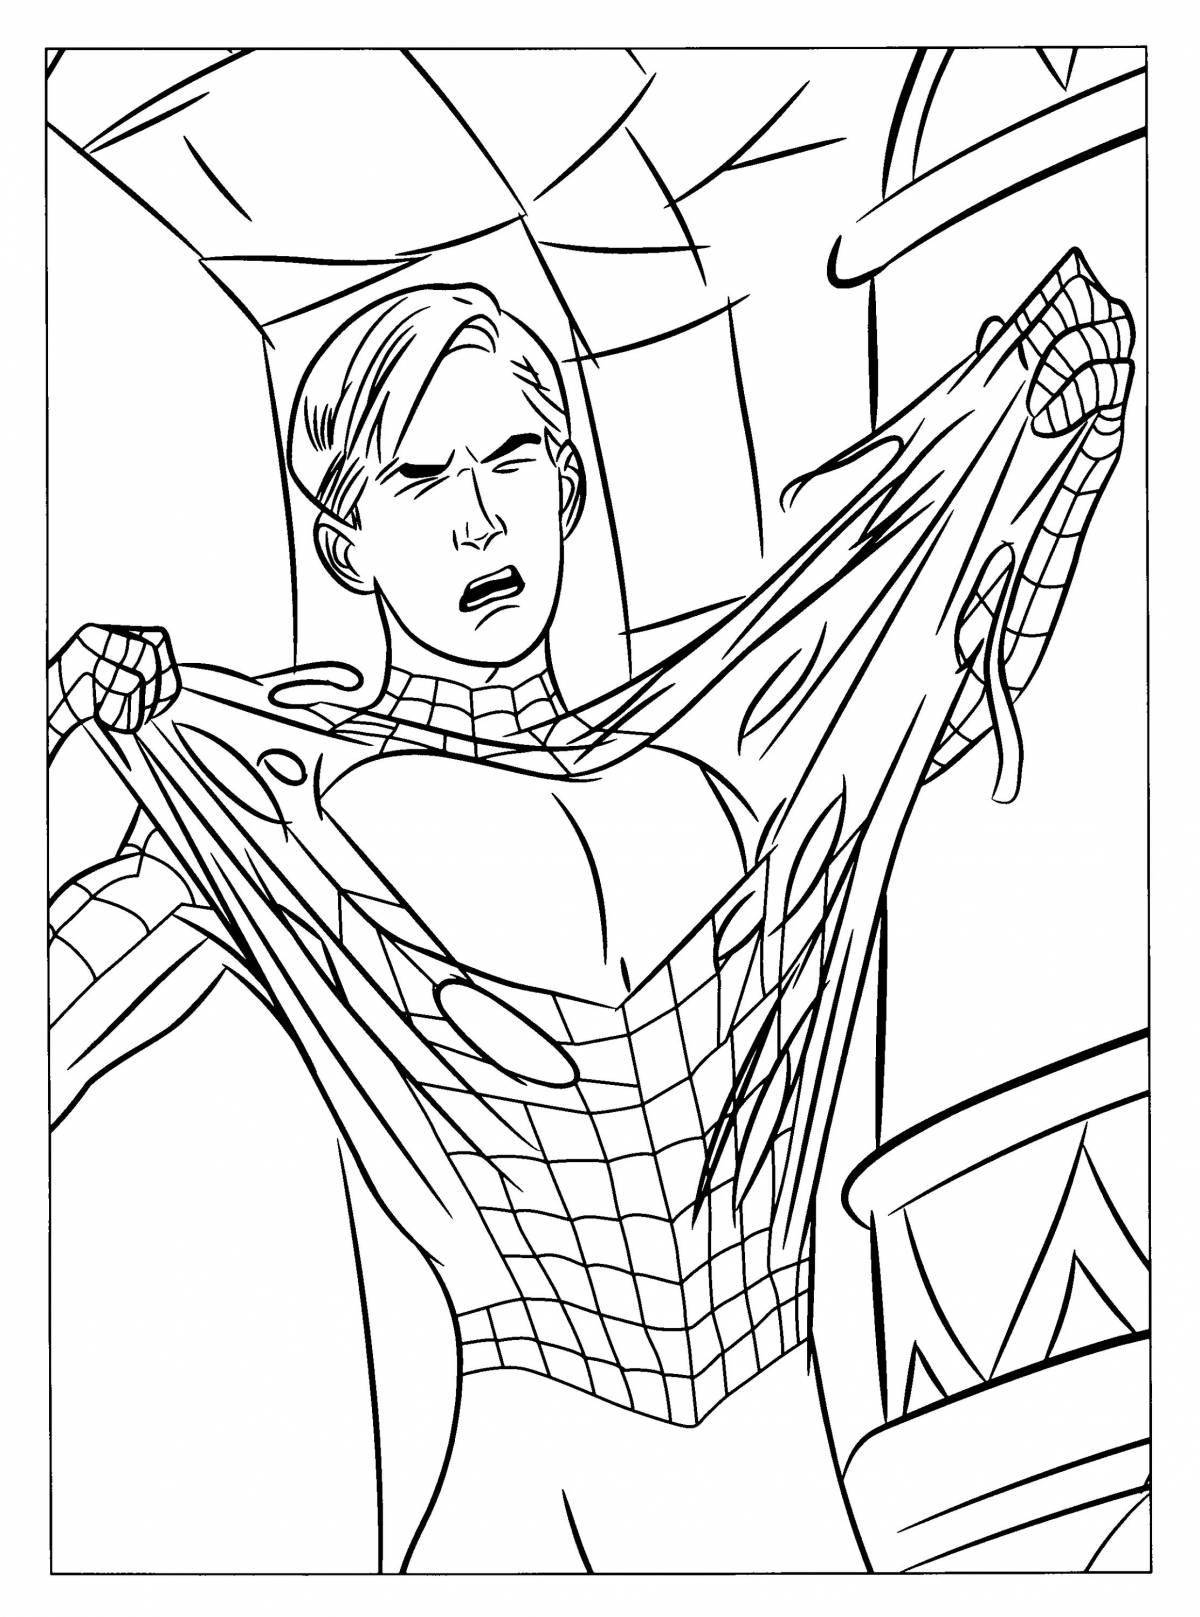 Peter parker spiderman freaky coloring book